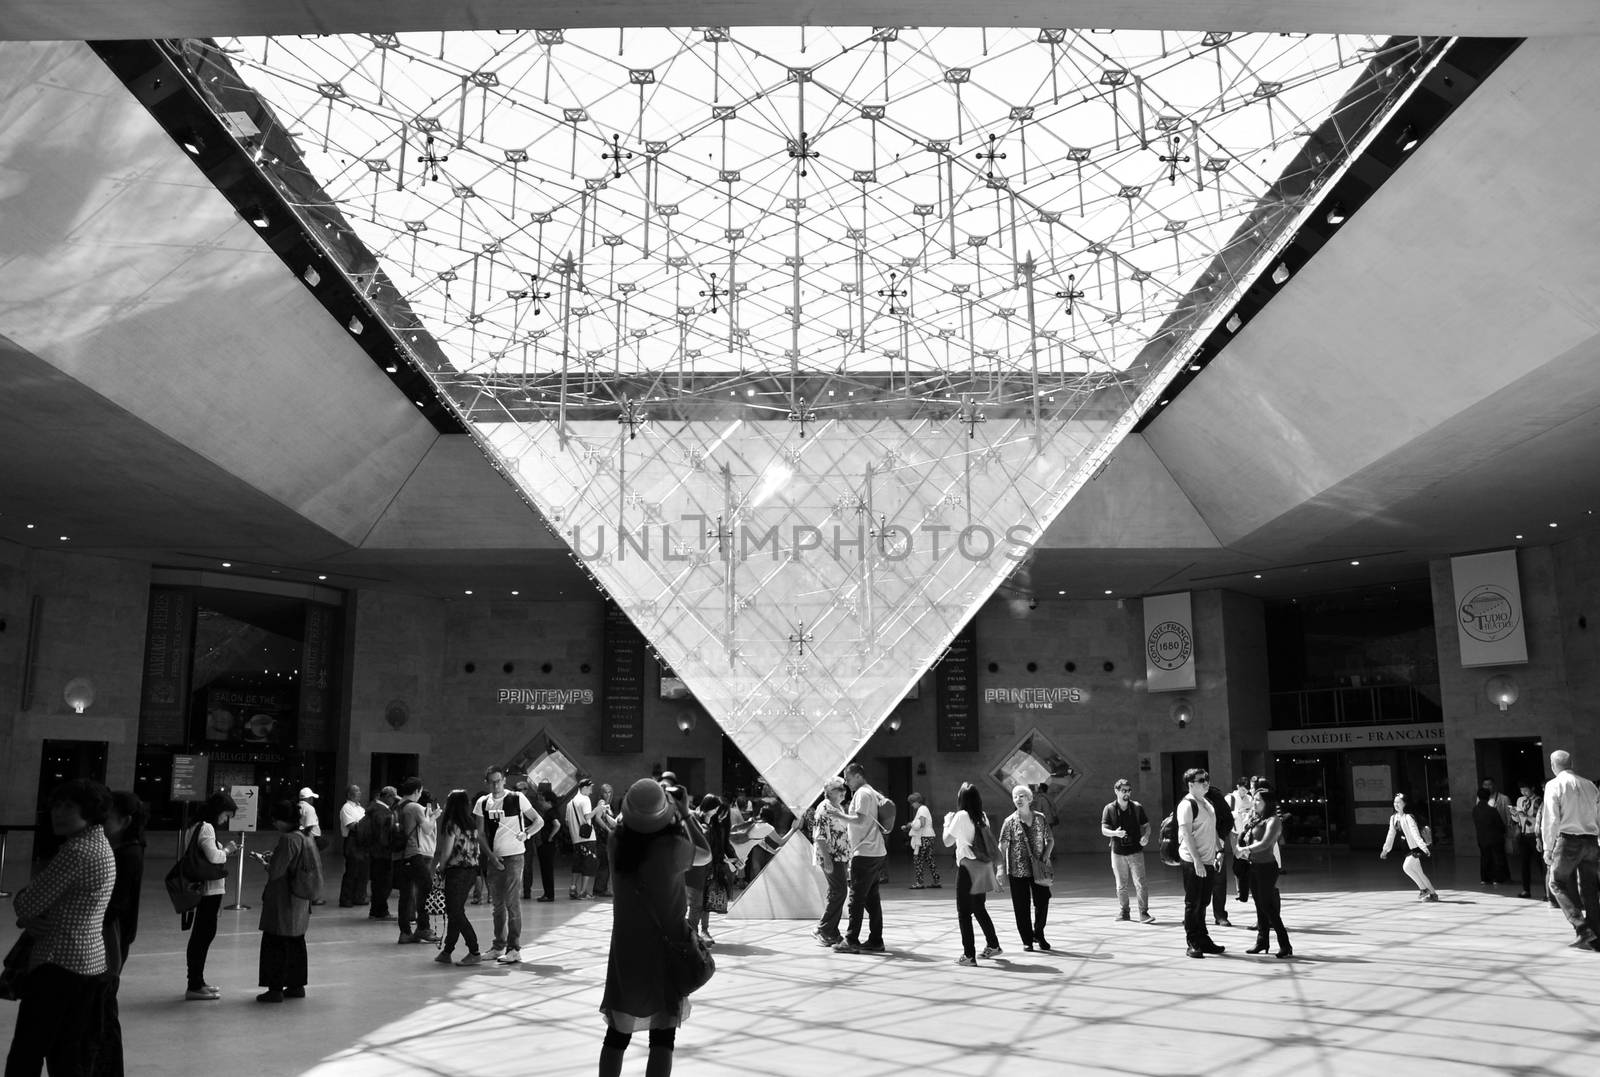 Paris, France - May 13, 2015: Tourists visit Inside the Louvres  by siraanamwong